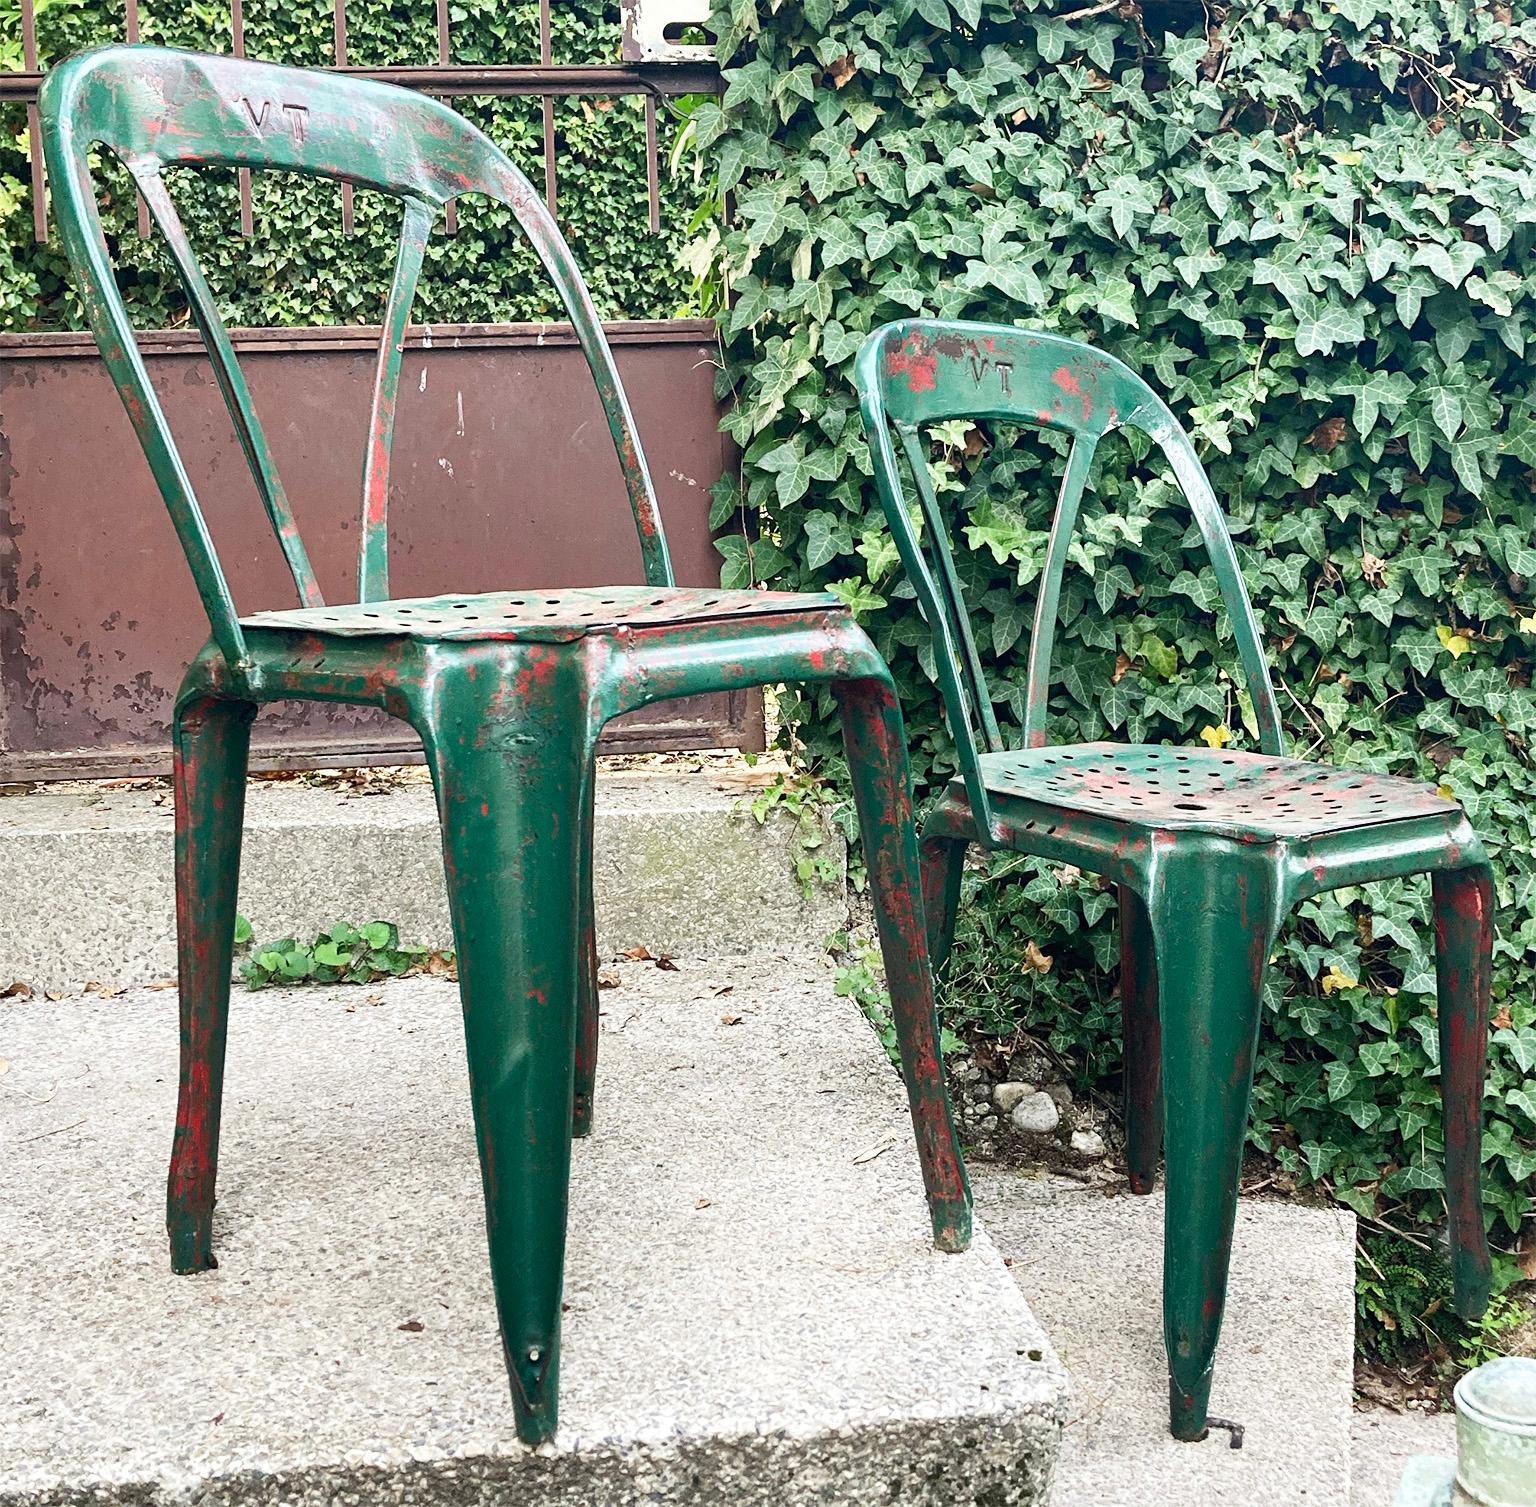 set of two 1940’s vintage Multipl’s metal dining chairs in excellent original condition. Designed by Joseph Mathieu and made in Pierre Benite in Lyon. These chairs are an iconic part of Industrial French History. Each chair was hand pressed in huge